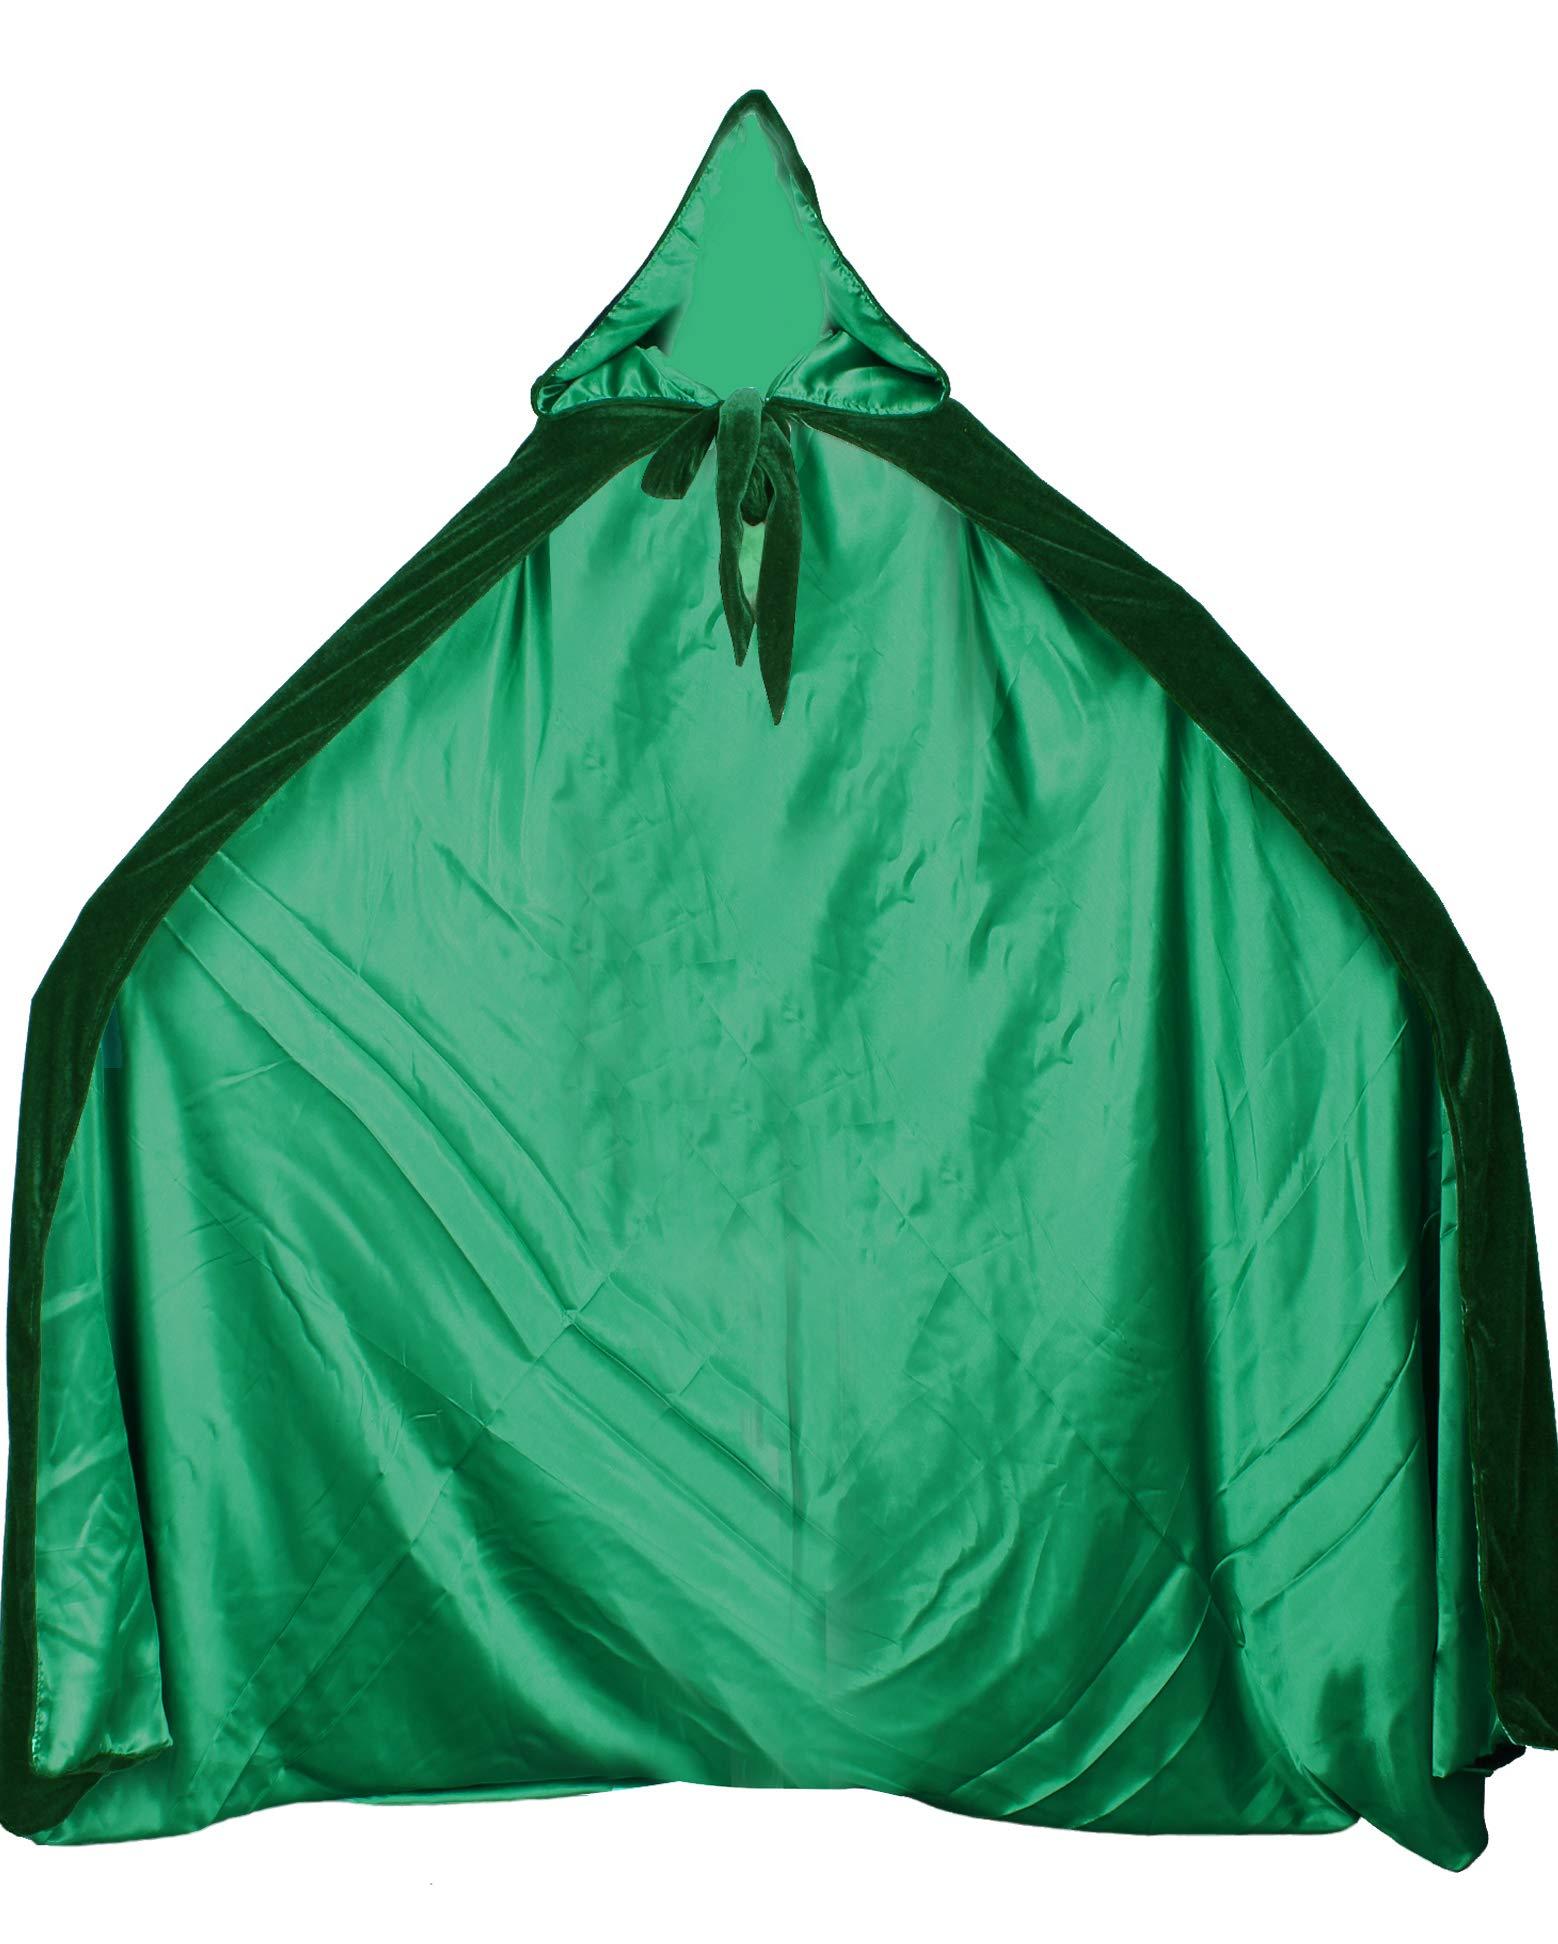 LuckyMjmy Velvet Medieval Wedding Cape Cloak Lined with Satin lining (Large, Dark green)